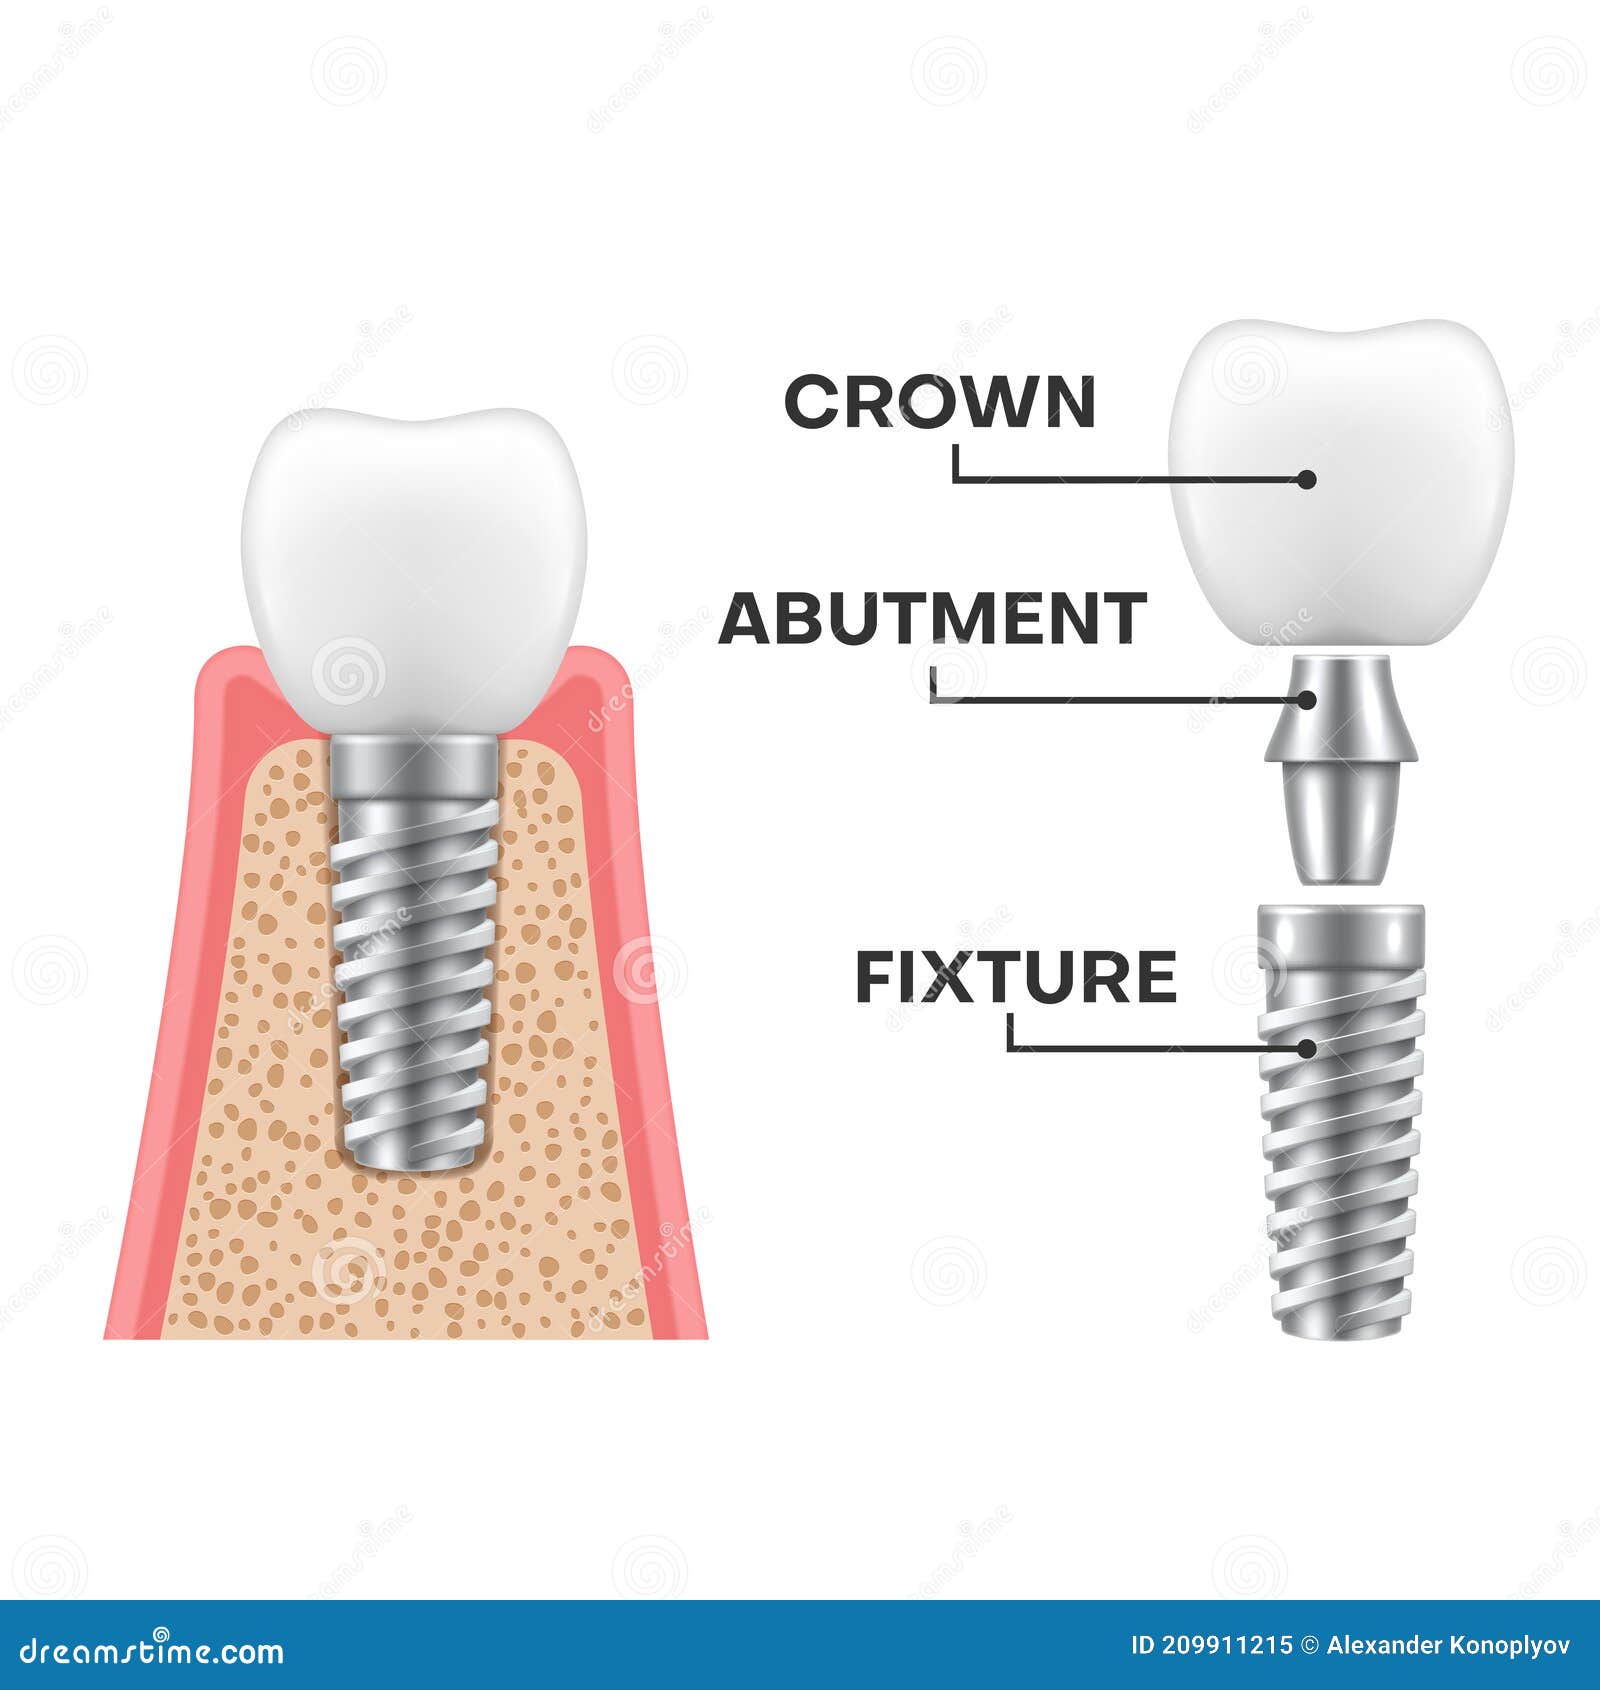 dental implant structure realistic schematic. implantation sequence. fixture, abutment, crown.